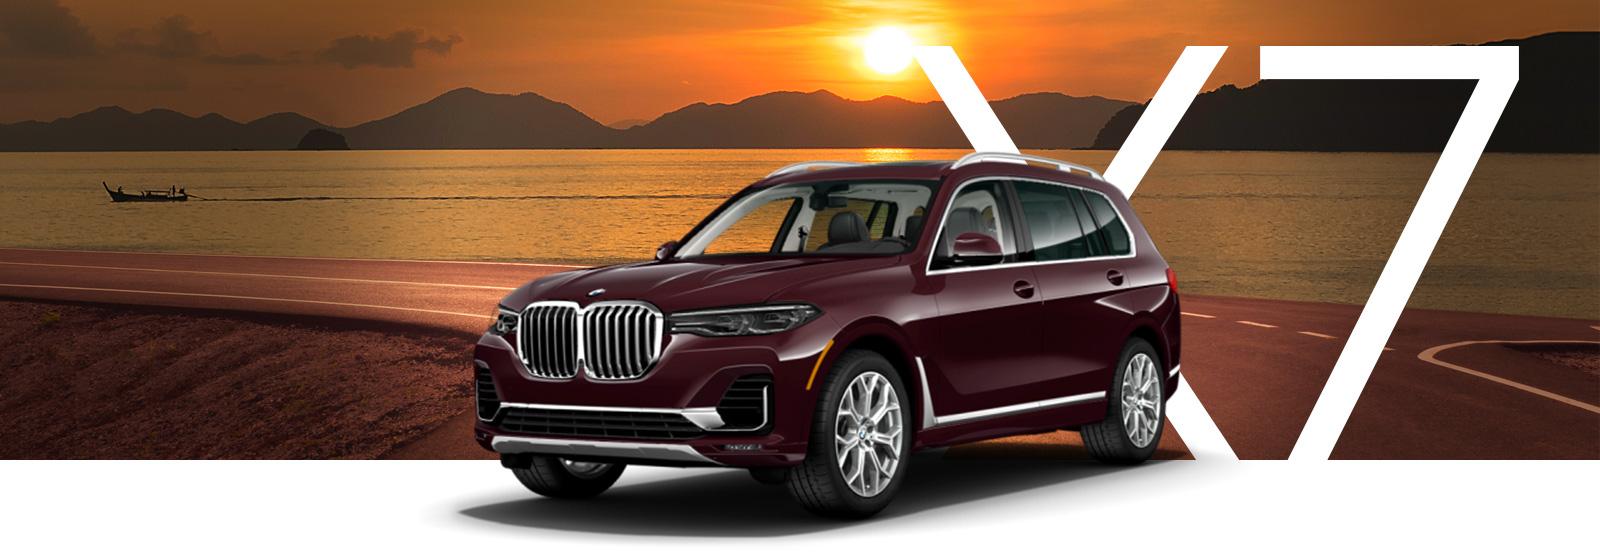 A burgundy BMW X7 parked on a bay-side road at sunset.